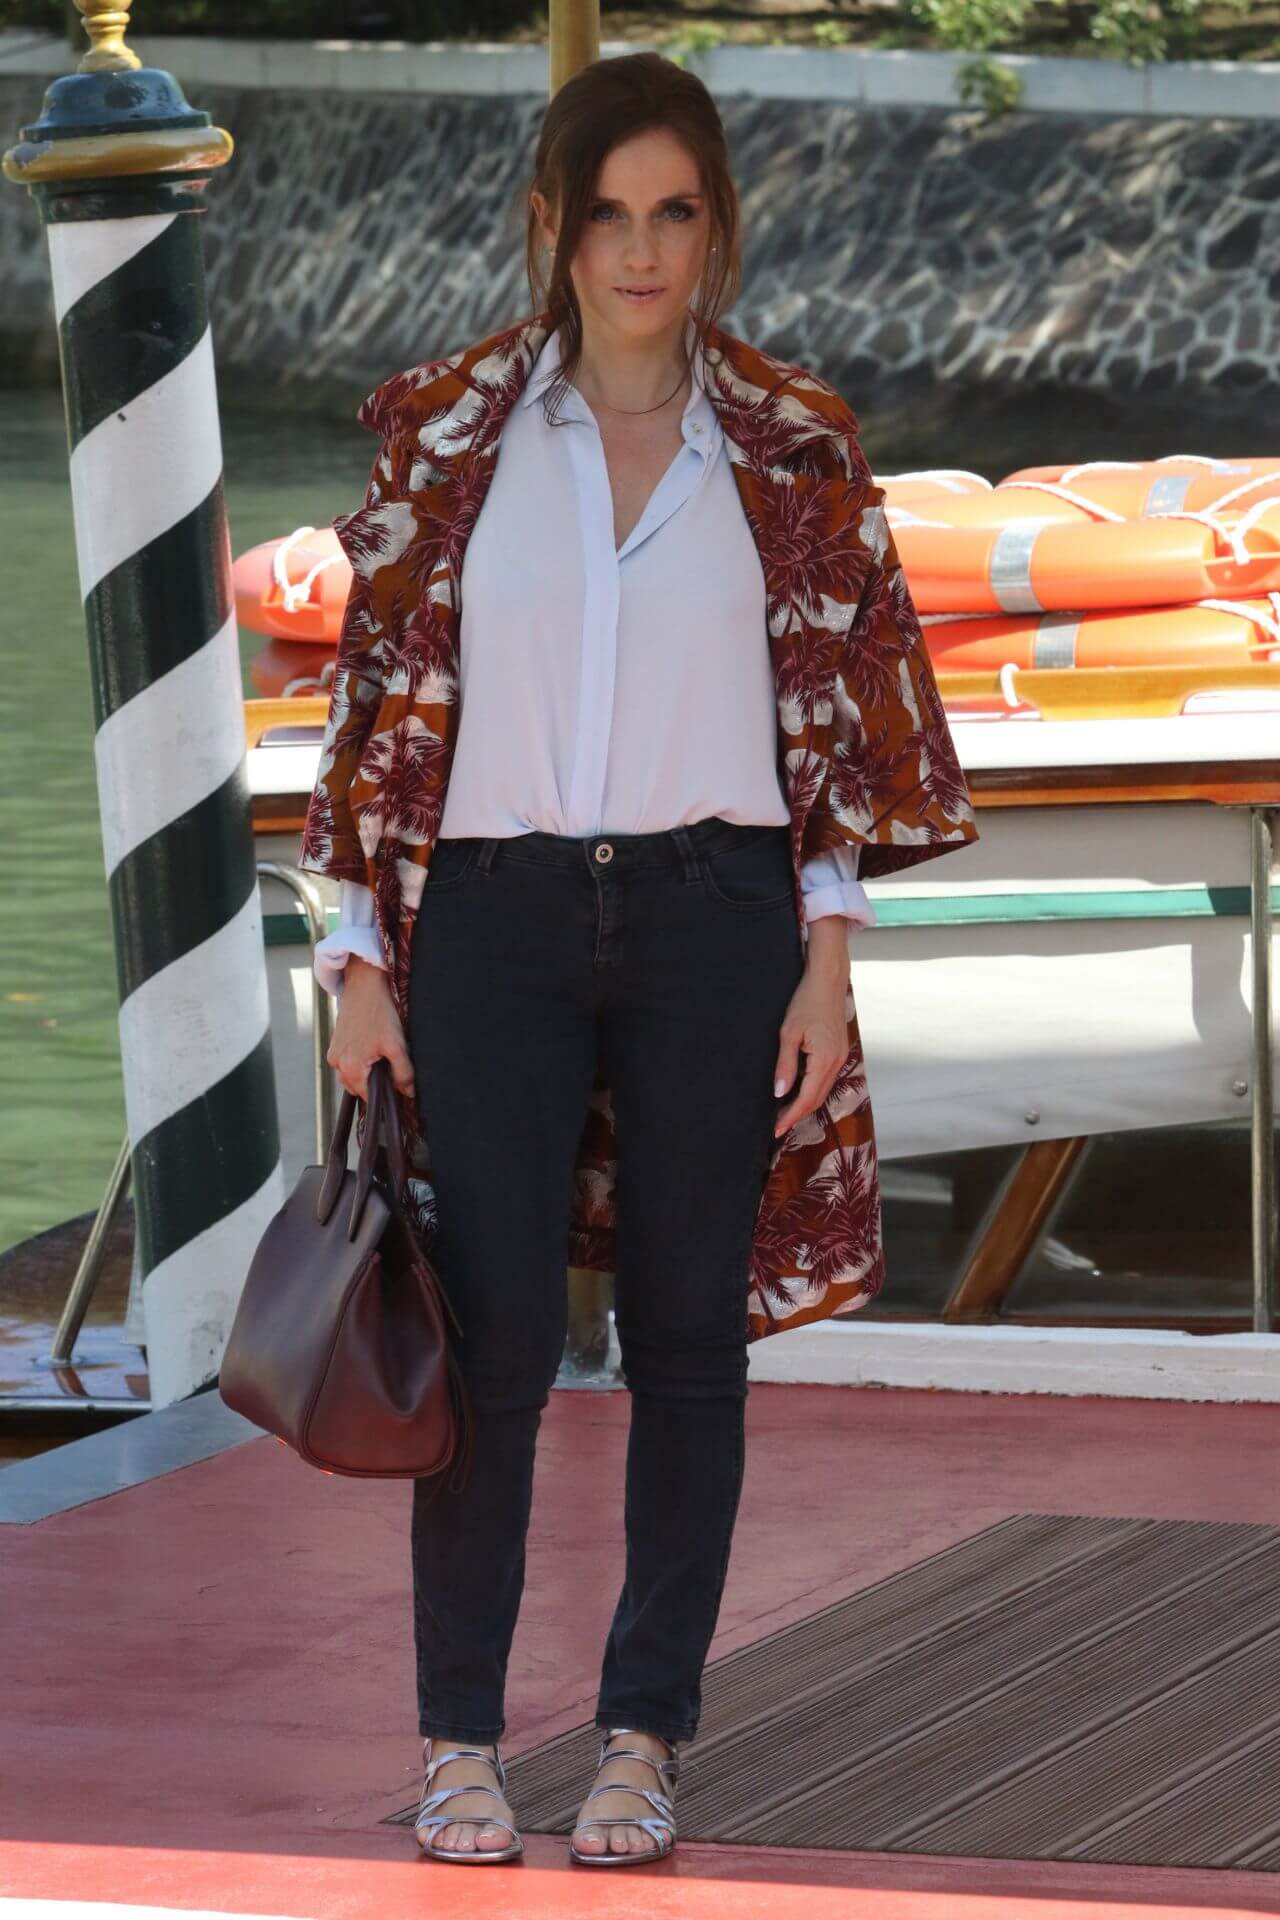 Chiara Iezzi  In a Printed Long Jacket Under White Shirt With Black Jeans  Arriving at the 75th Venice Film Festival